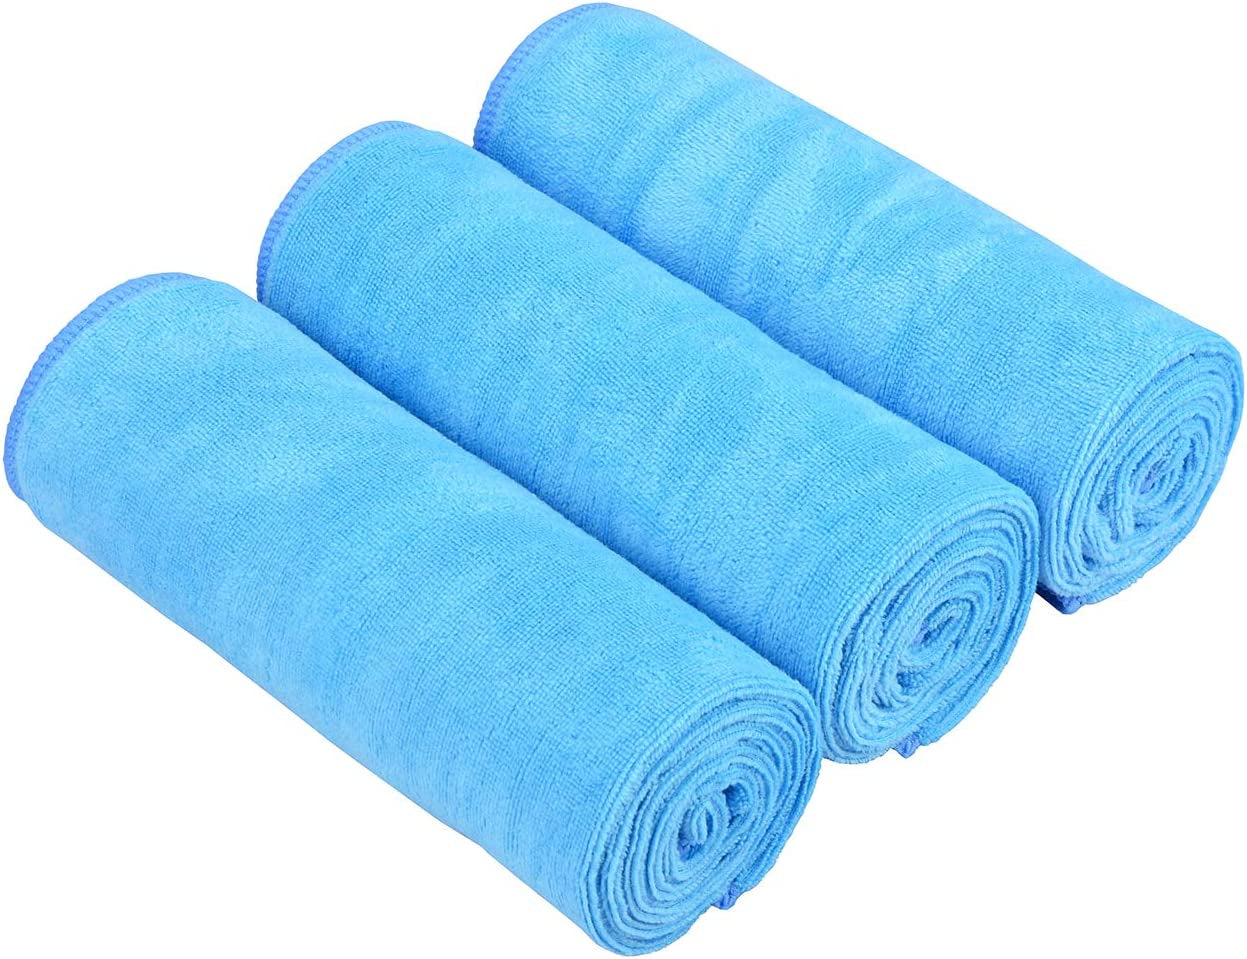 HOPESHIN Gyms Yoga Towels Sweat Fitness Exercise Microfiber Workout Towels Absorbent Gym Towels for Men & Women Sports Towels Soft Fast Drying 3 Pack, 16Inchx32Inch